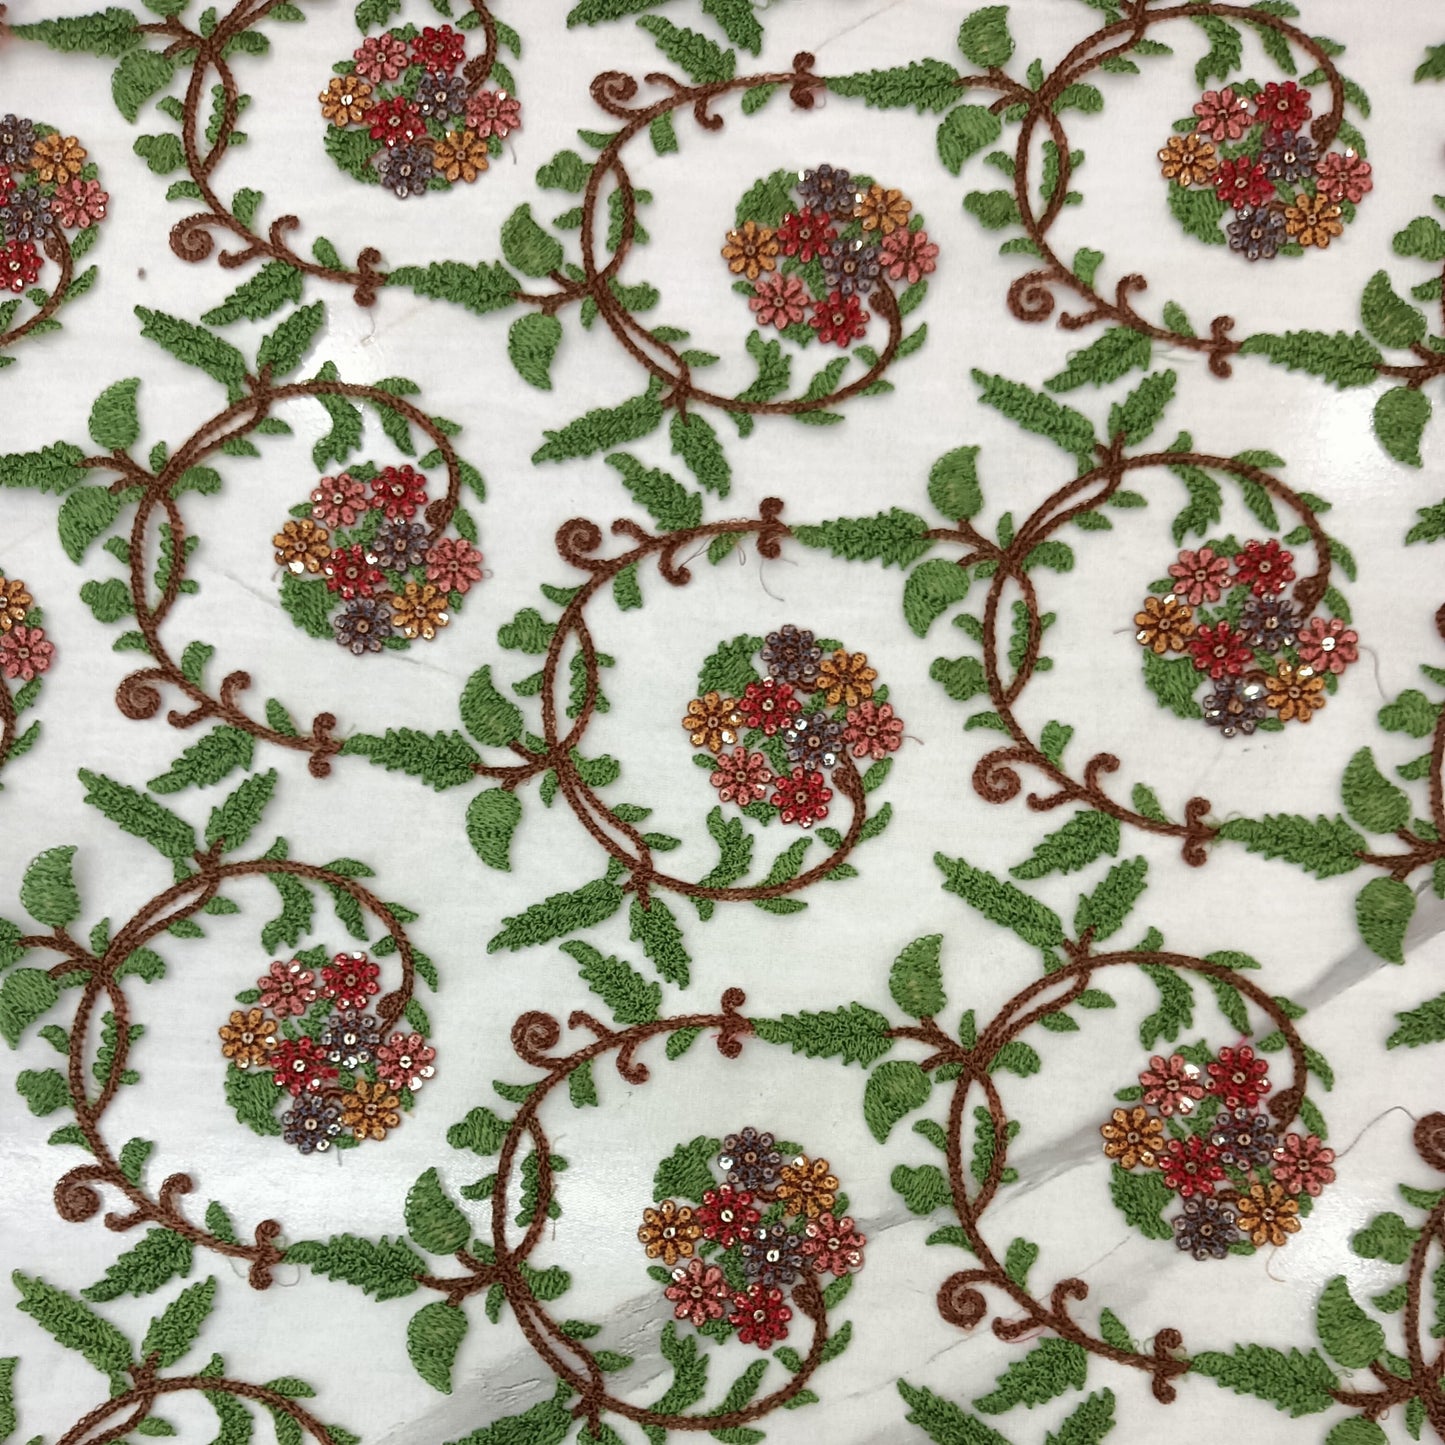 Heavy  Floral Embroidery on Net Fabric